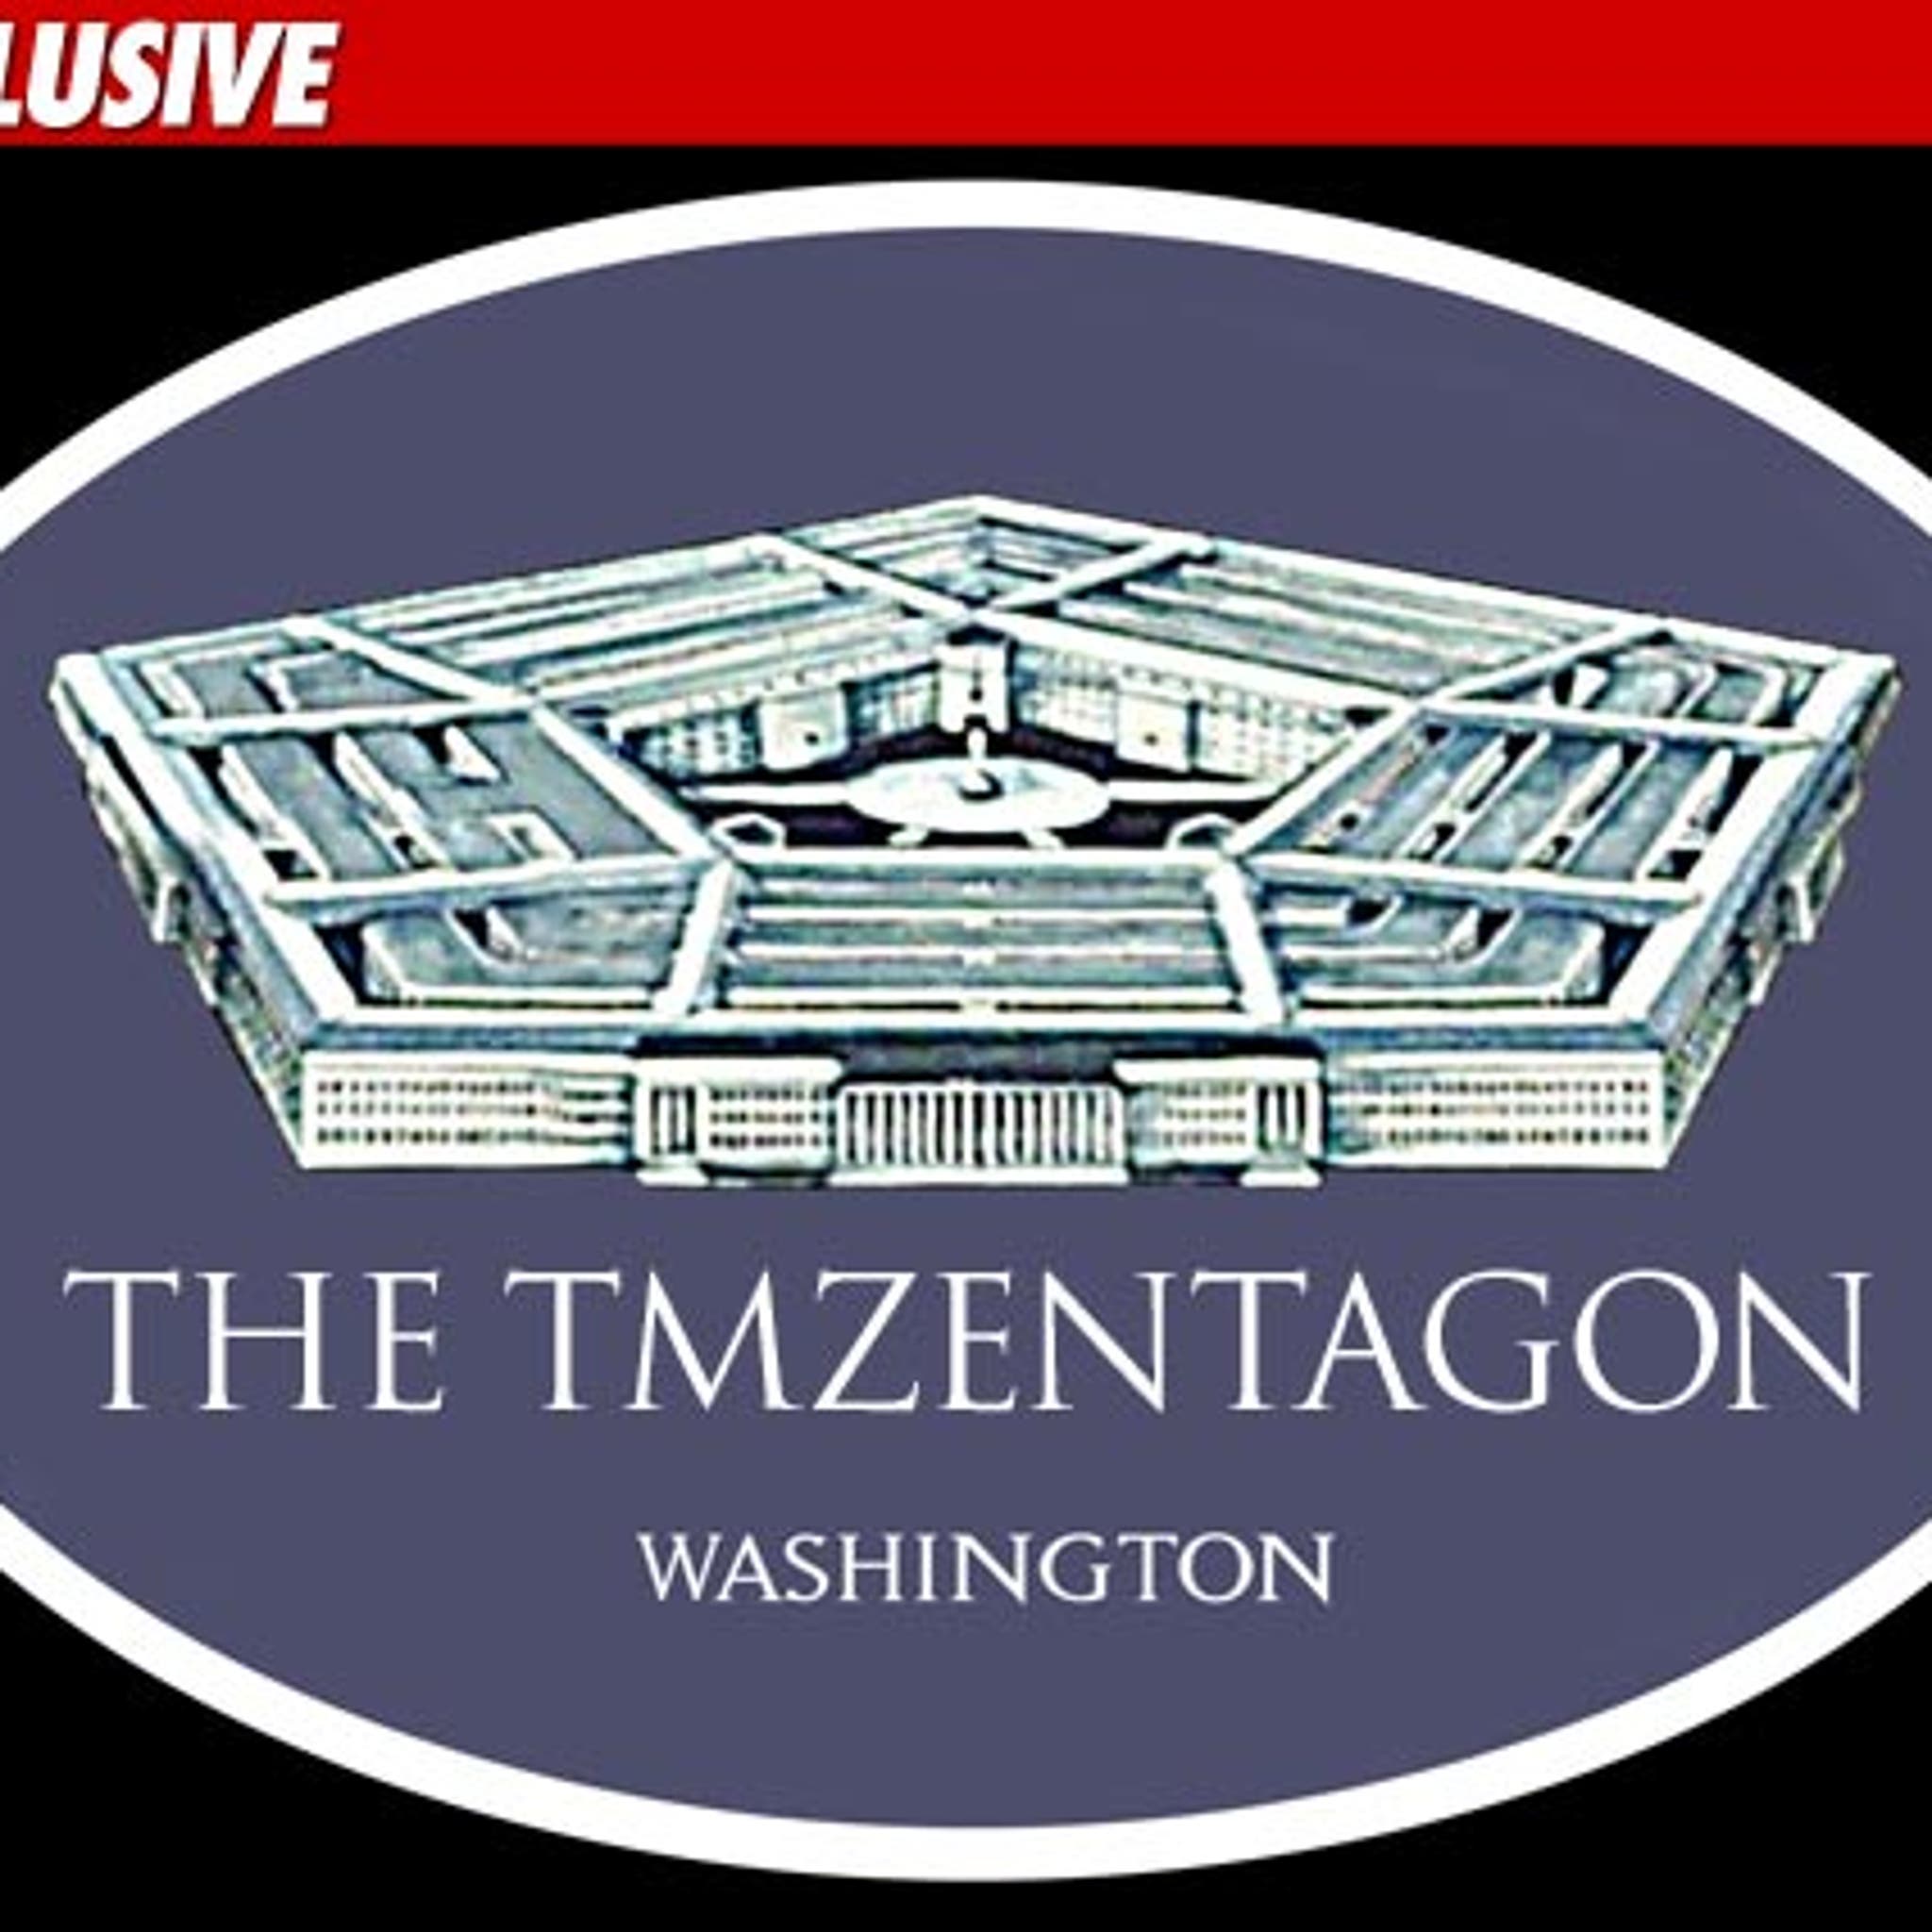 Pentagon FURIOUS -- How Did TMZ Find Our Missile?